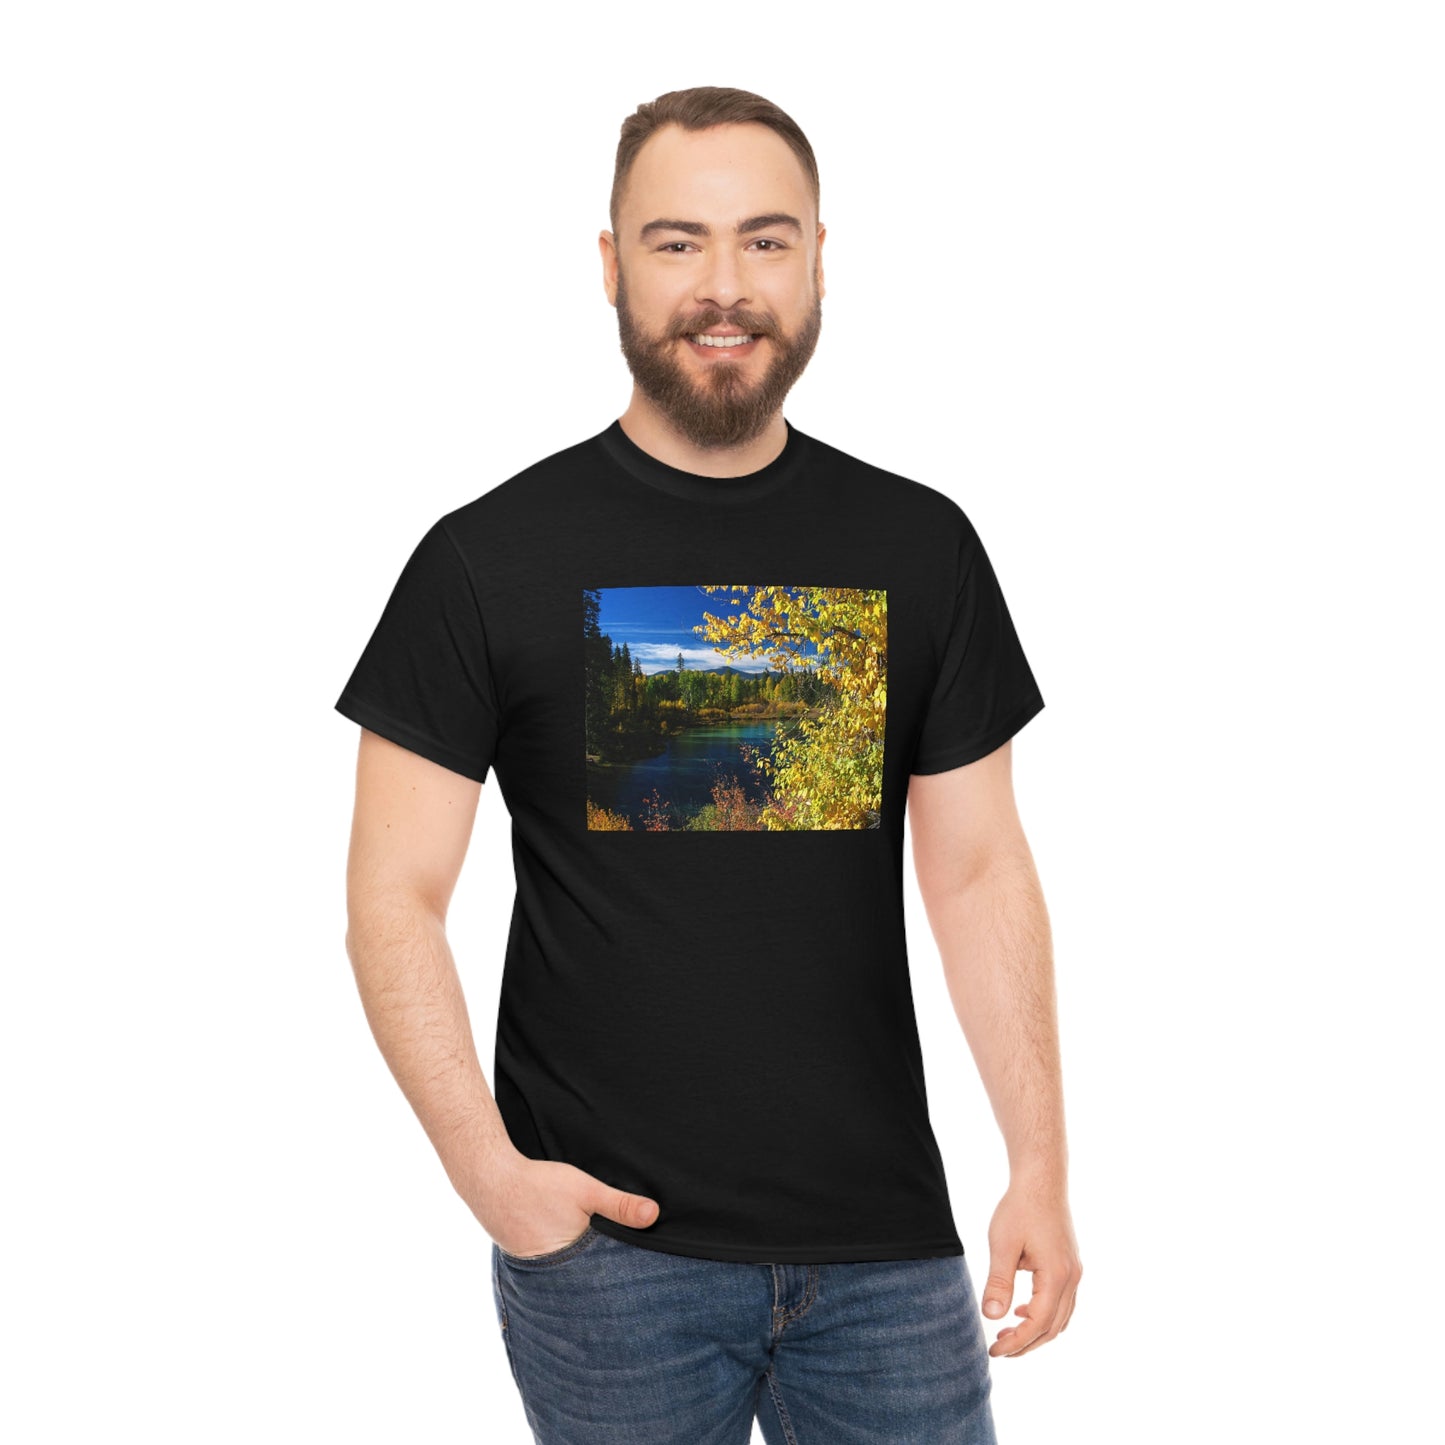 Wood River, Kimball State Park, Ft. Klamath Or.       Unisex Heavy Cotton Tee